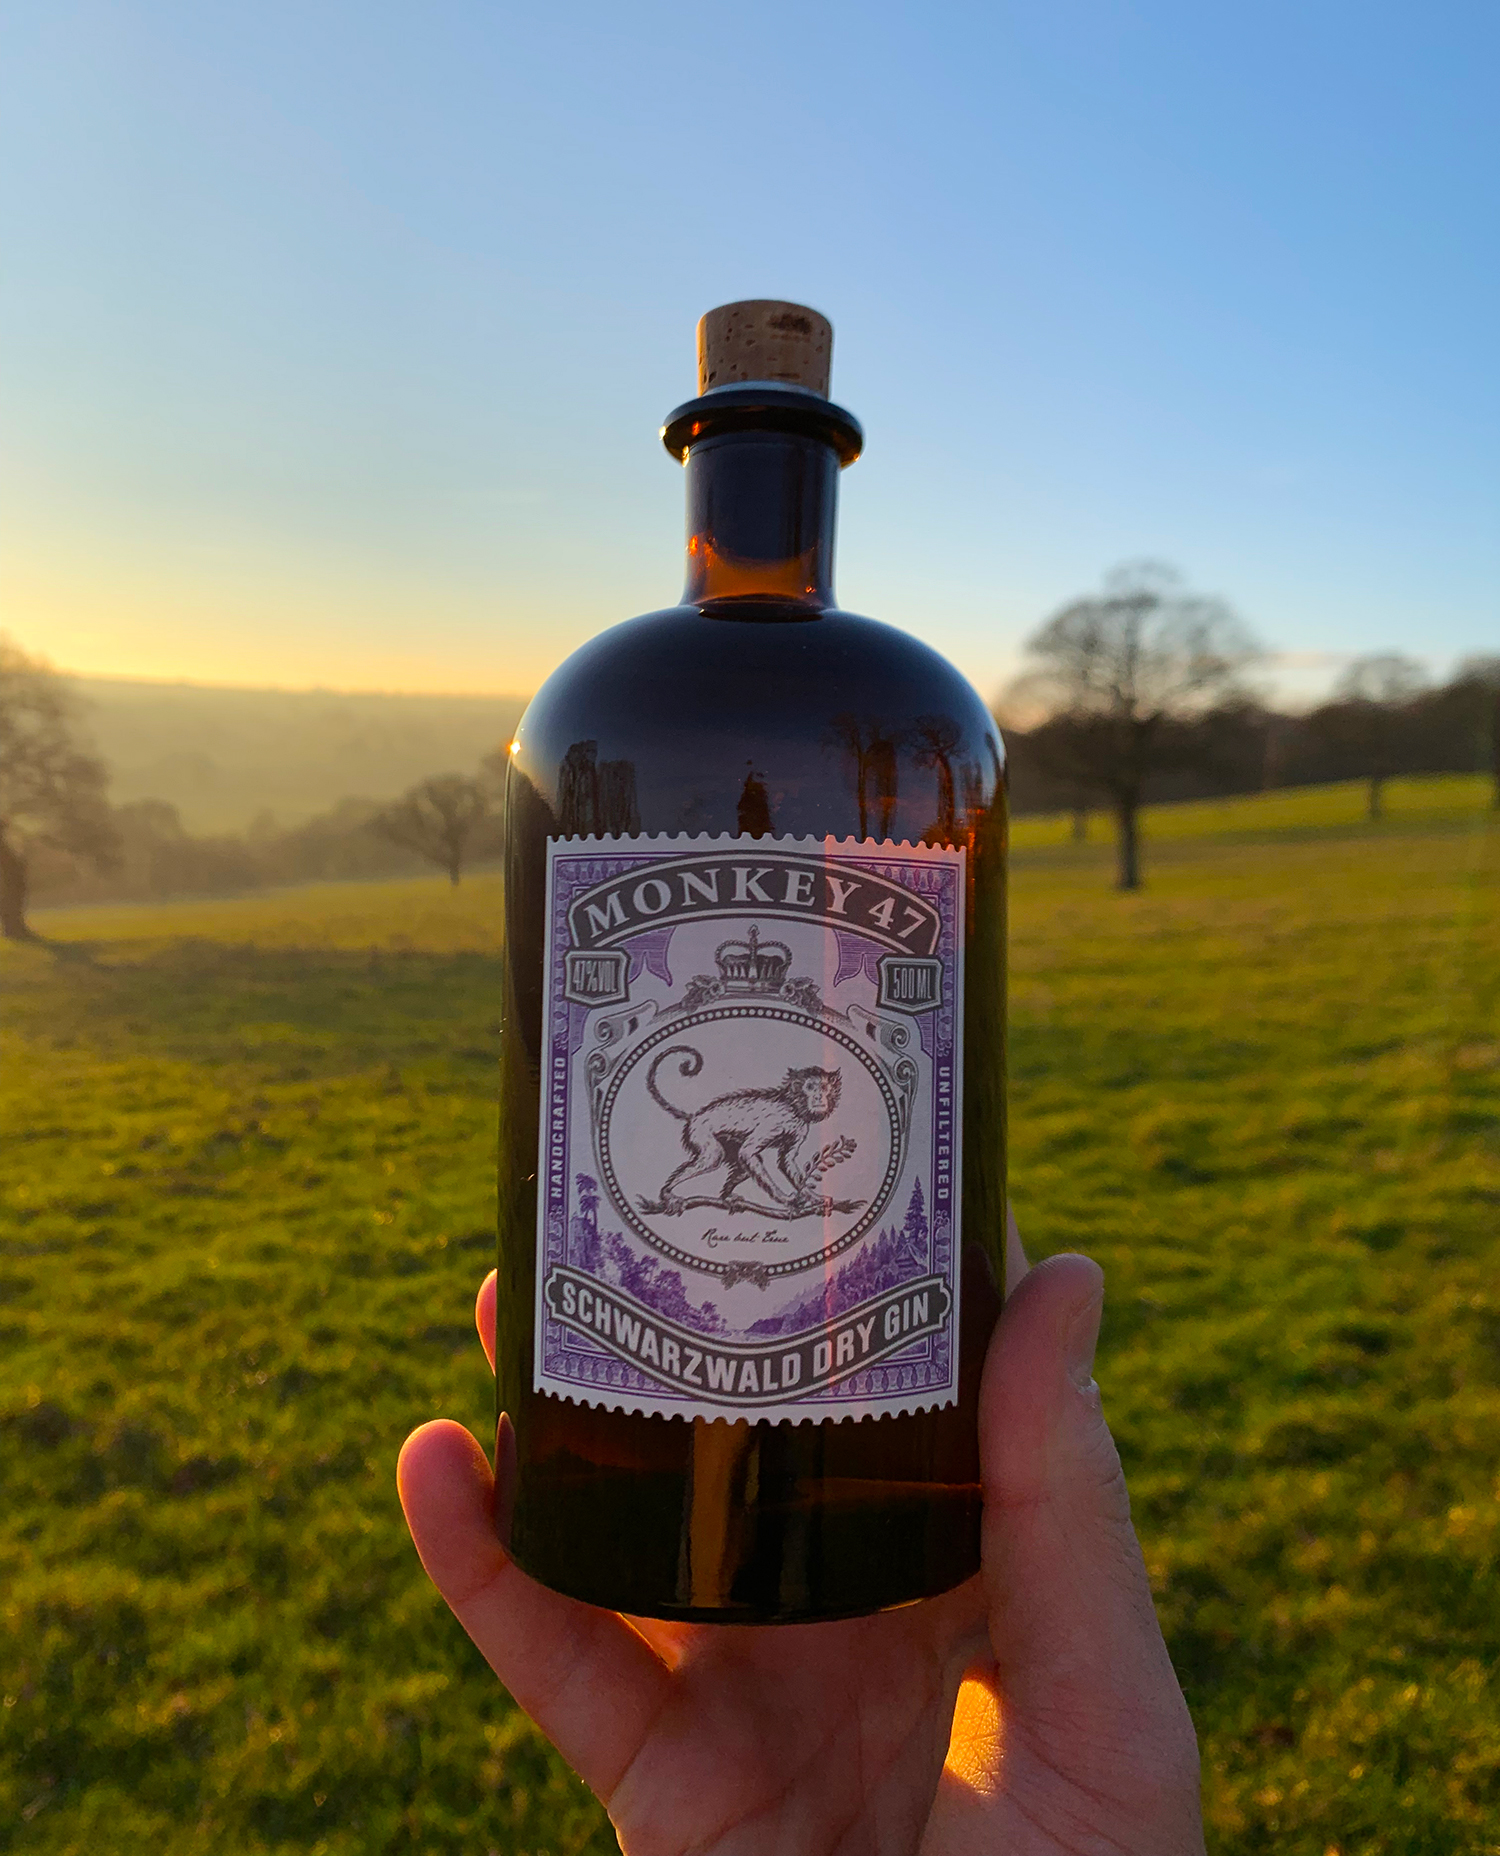 Monkey 47 Schwarzwald The - - & Review Tonicly Dry Gin Standard Gold Gin